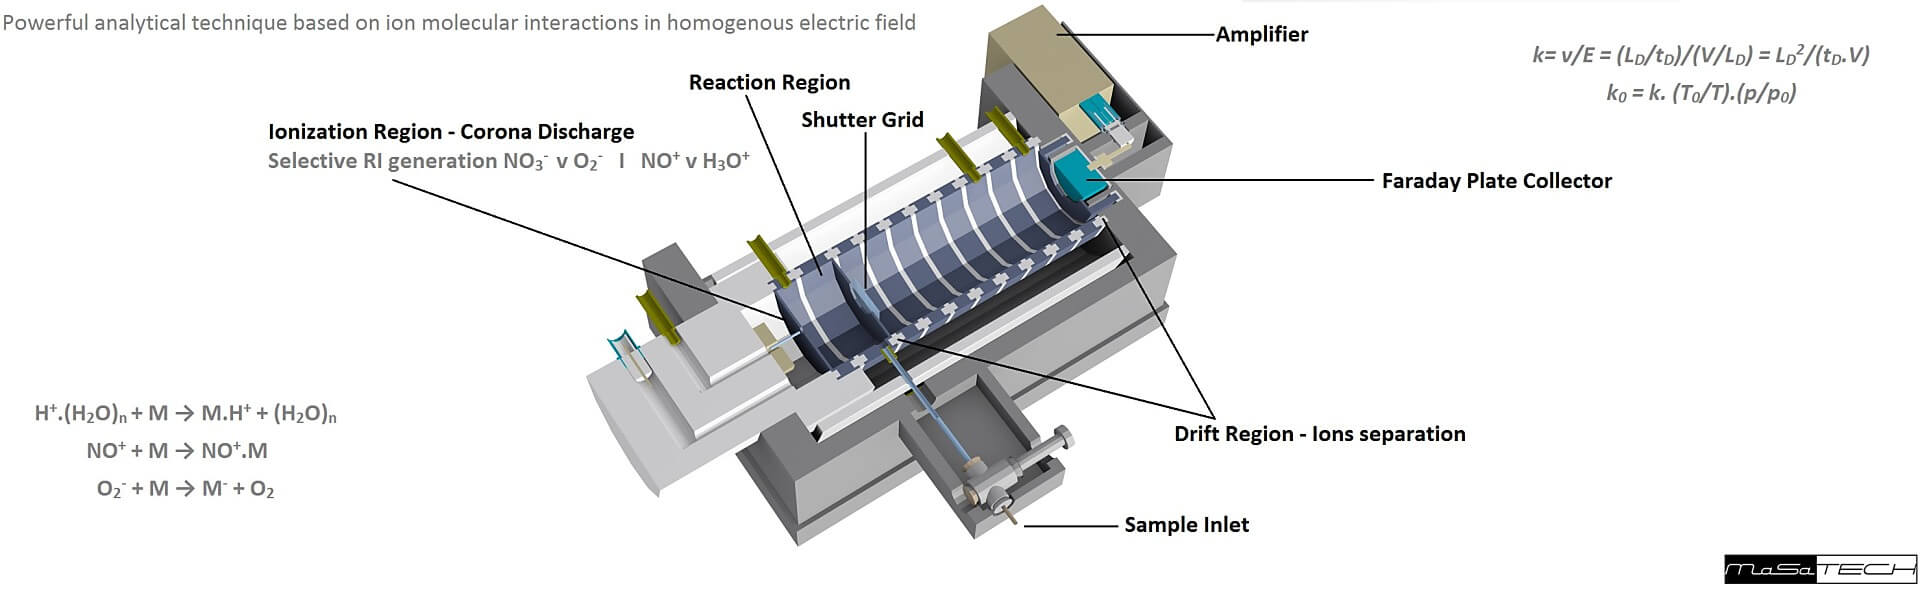 ion mobility spectrometry